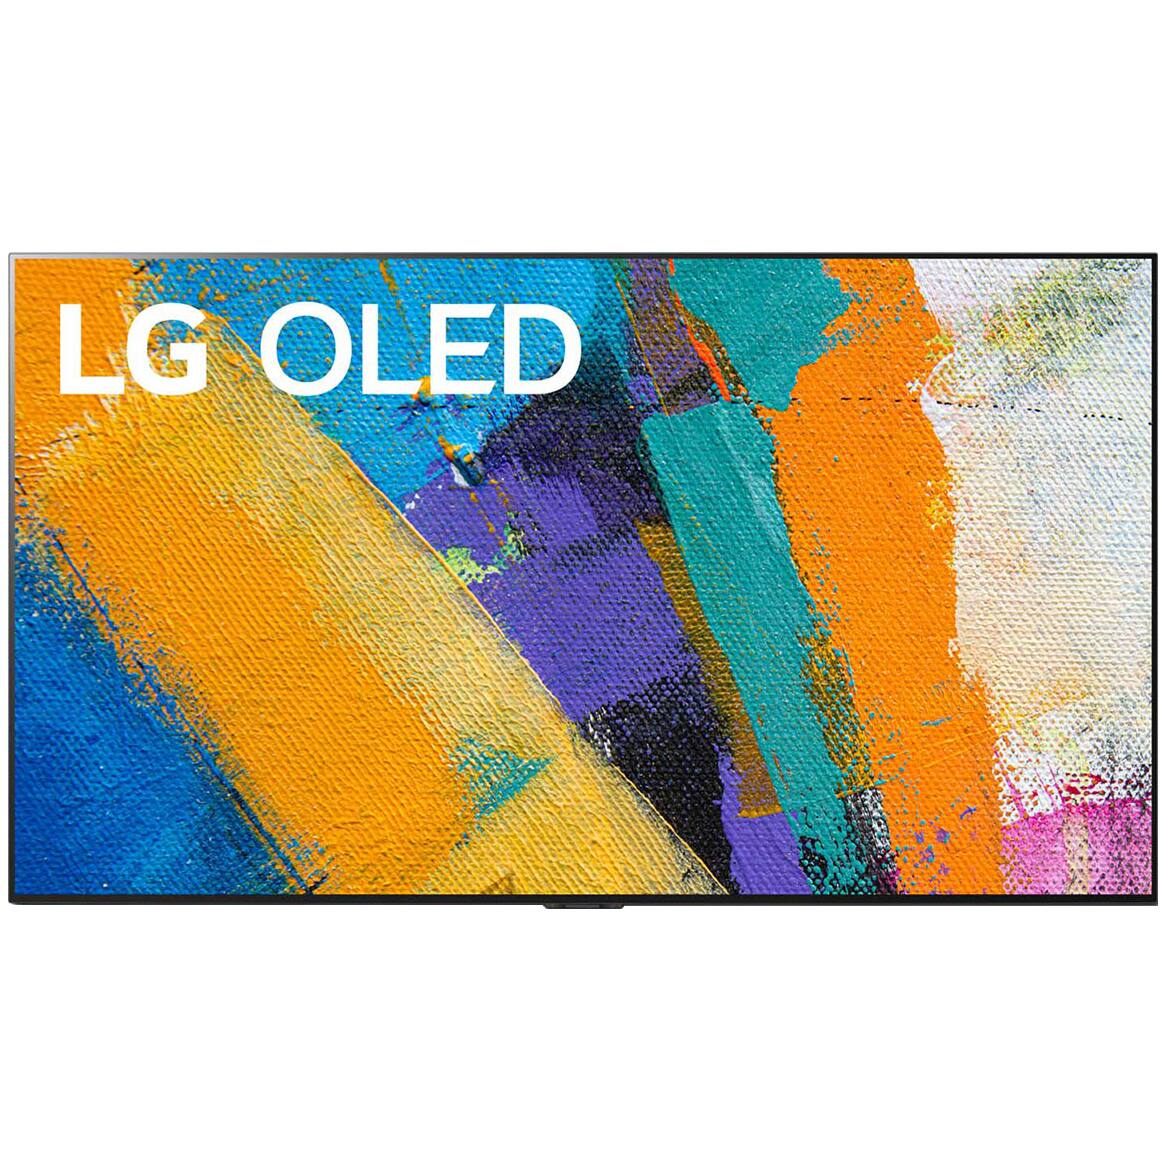 77" LG OLED77GXPUA 4K OLED TV + Stand +  $250 Visa GC + 2-Year Accidental Damage Warranty w/ Burn in Coverage $3497 (or less w/ SD Cashback) + Free S/H at Buydig